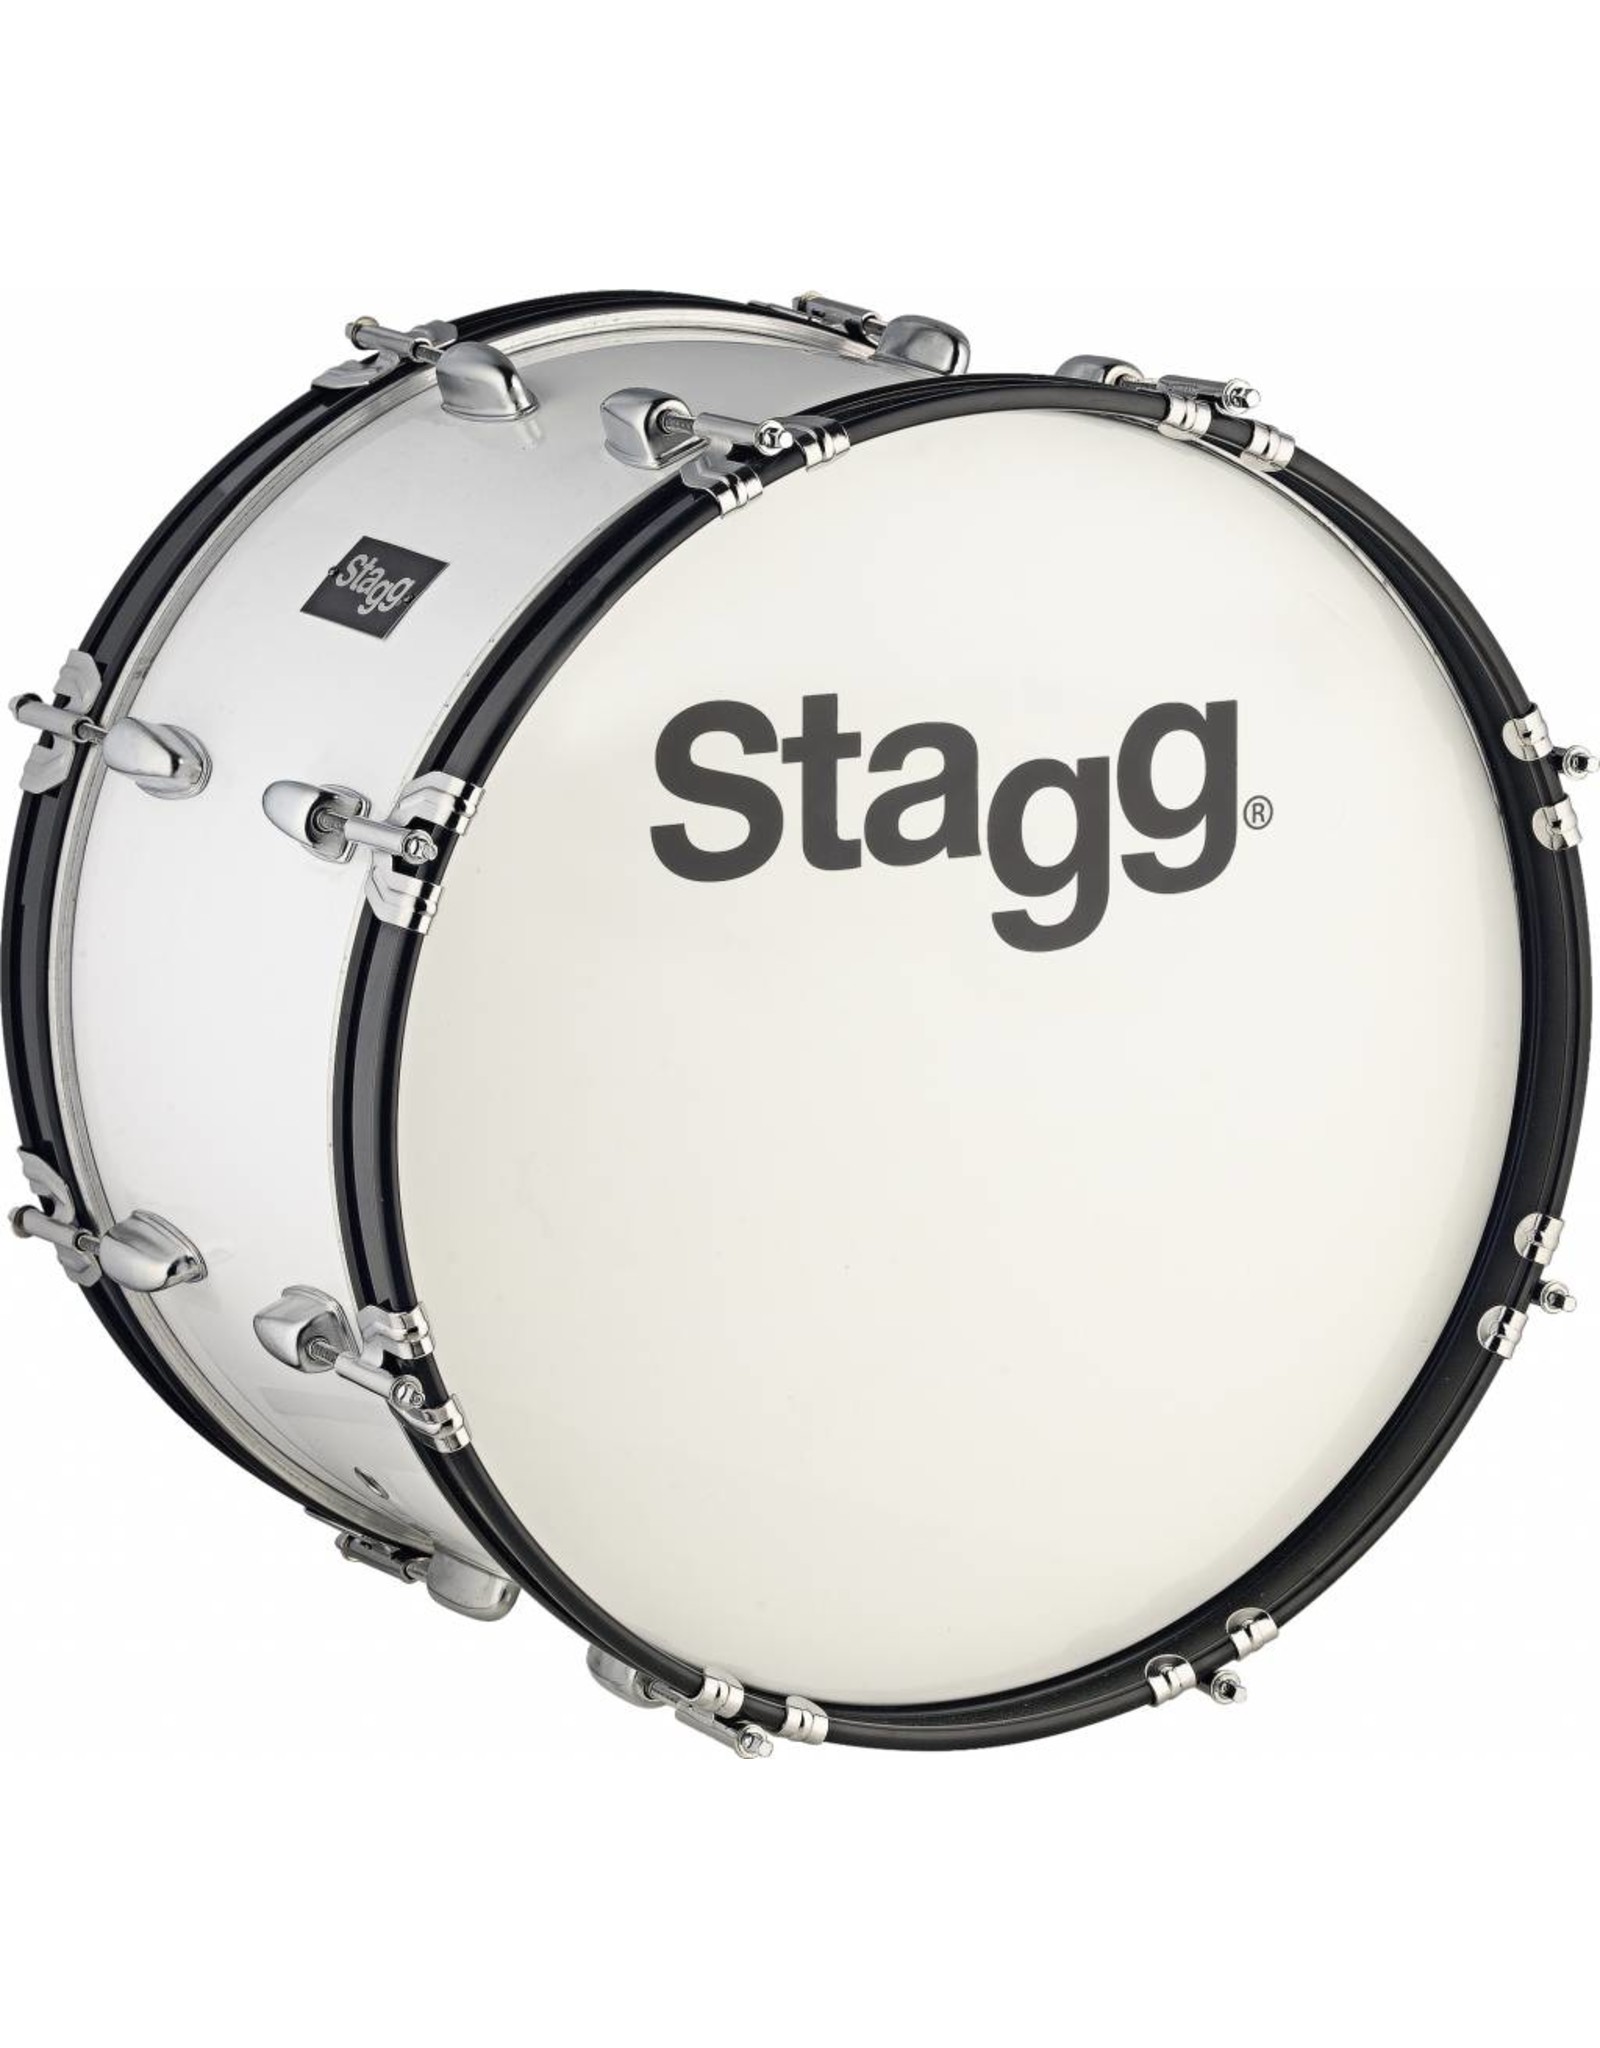 Stagg MABD-2212 Marching bassdrum grote trom 22 x 12"